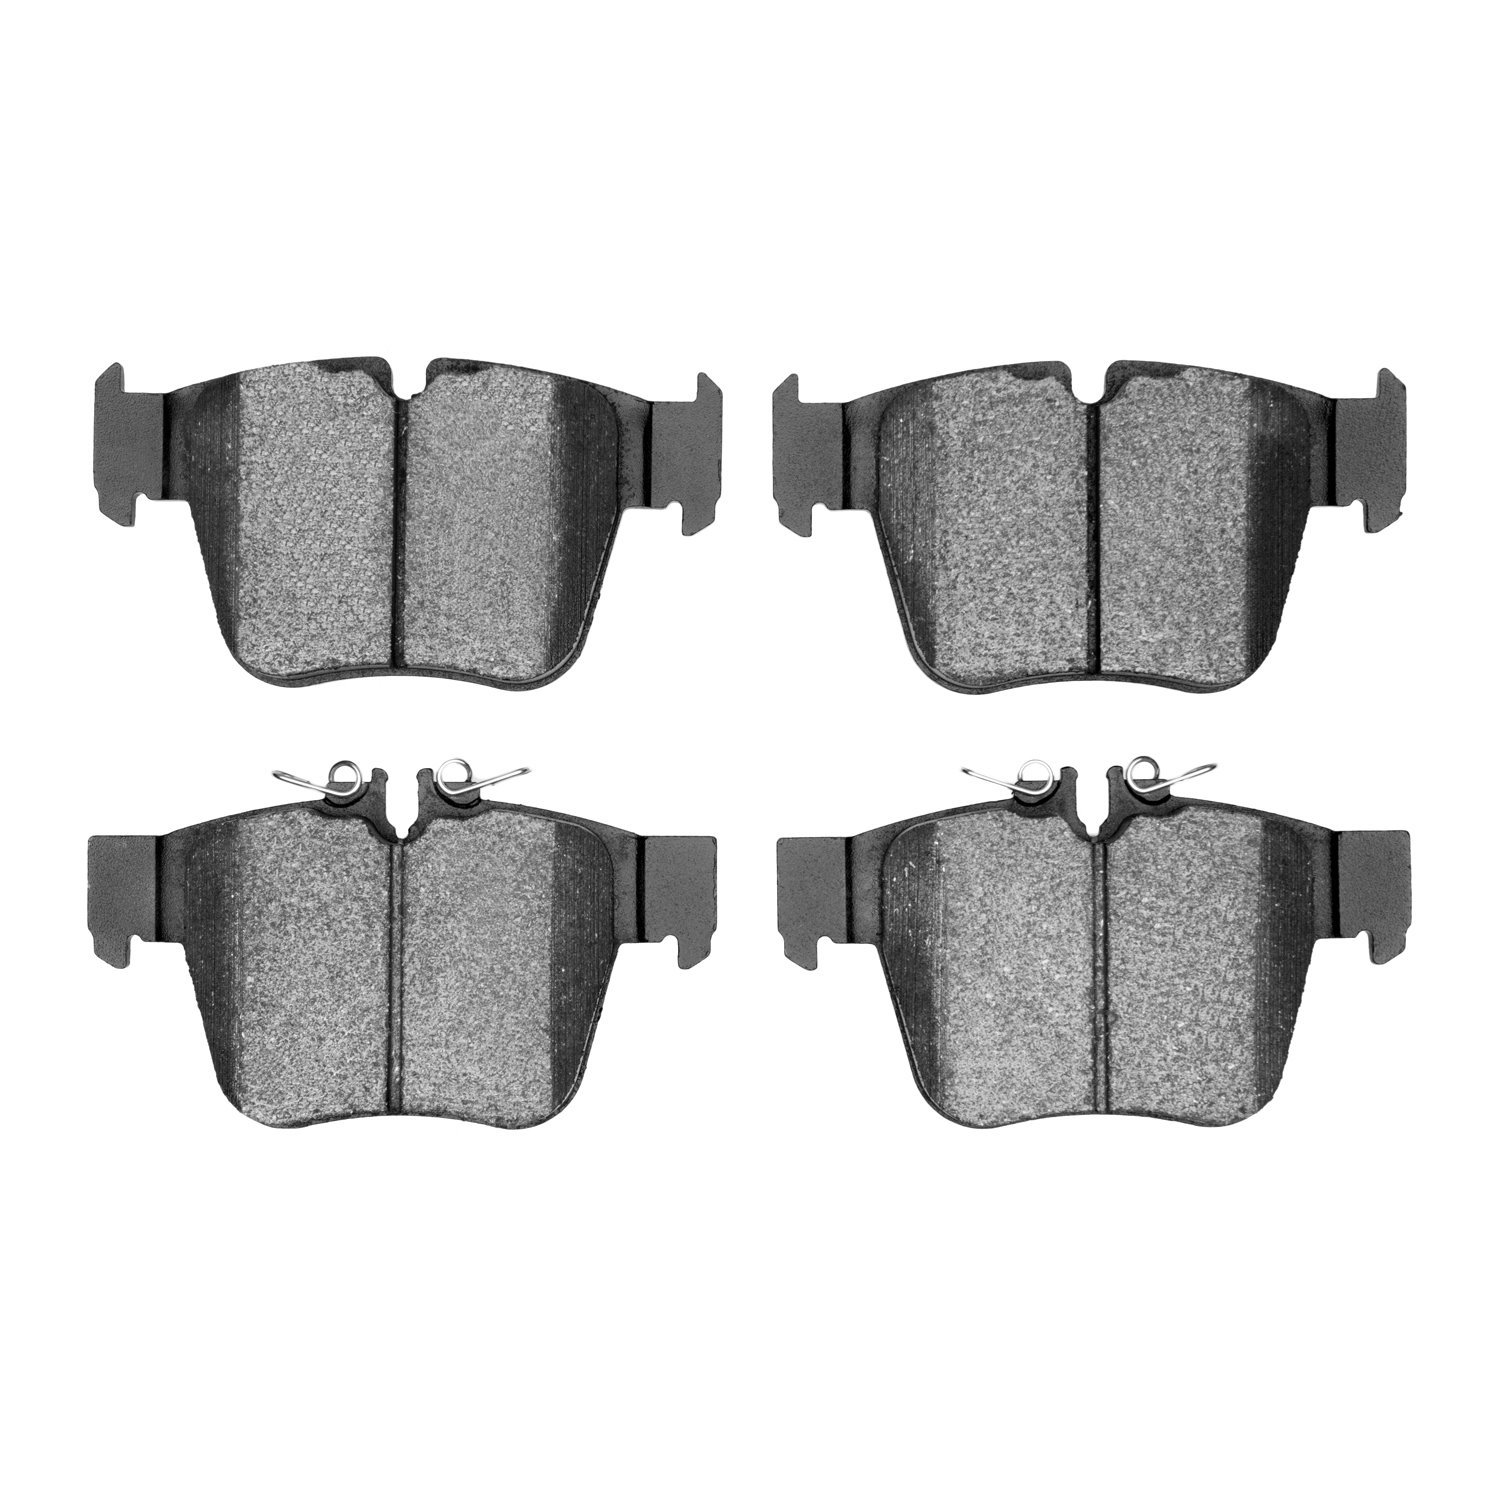 1600-1872-00 5000 Euro Ceramic Brake Pads, Fits Select Mercedes-Benz, Position: Rear